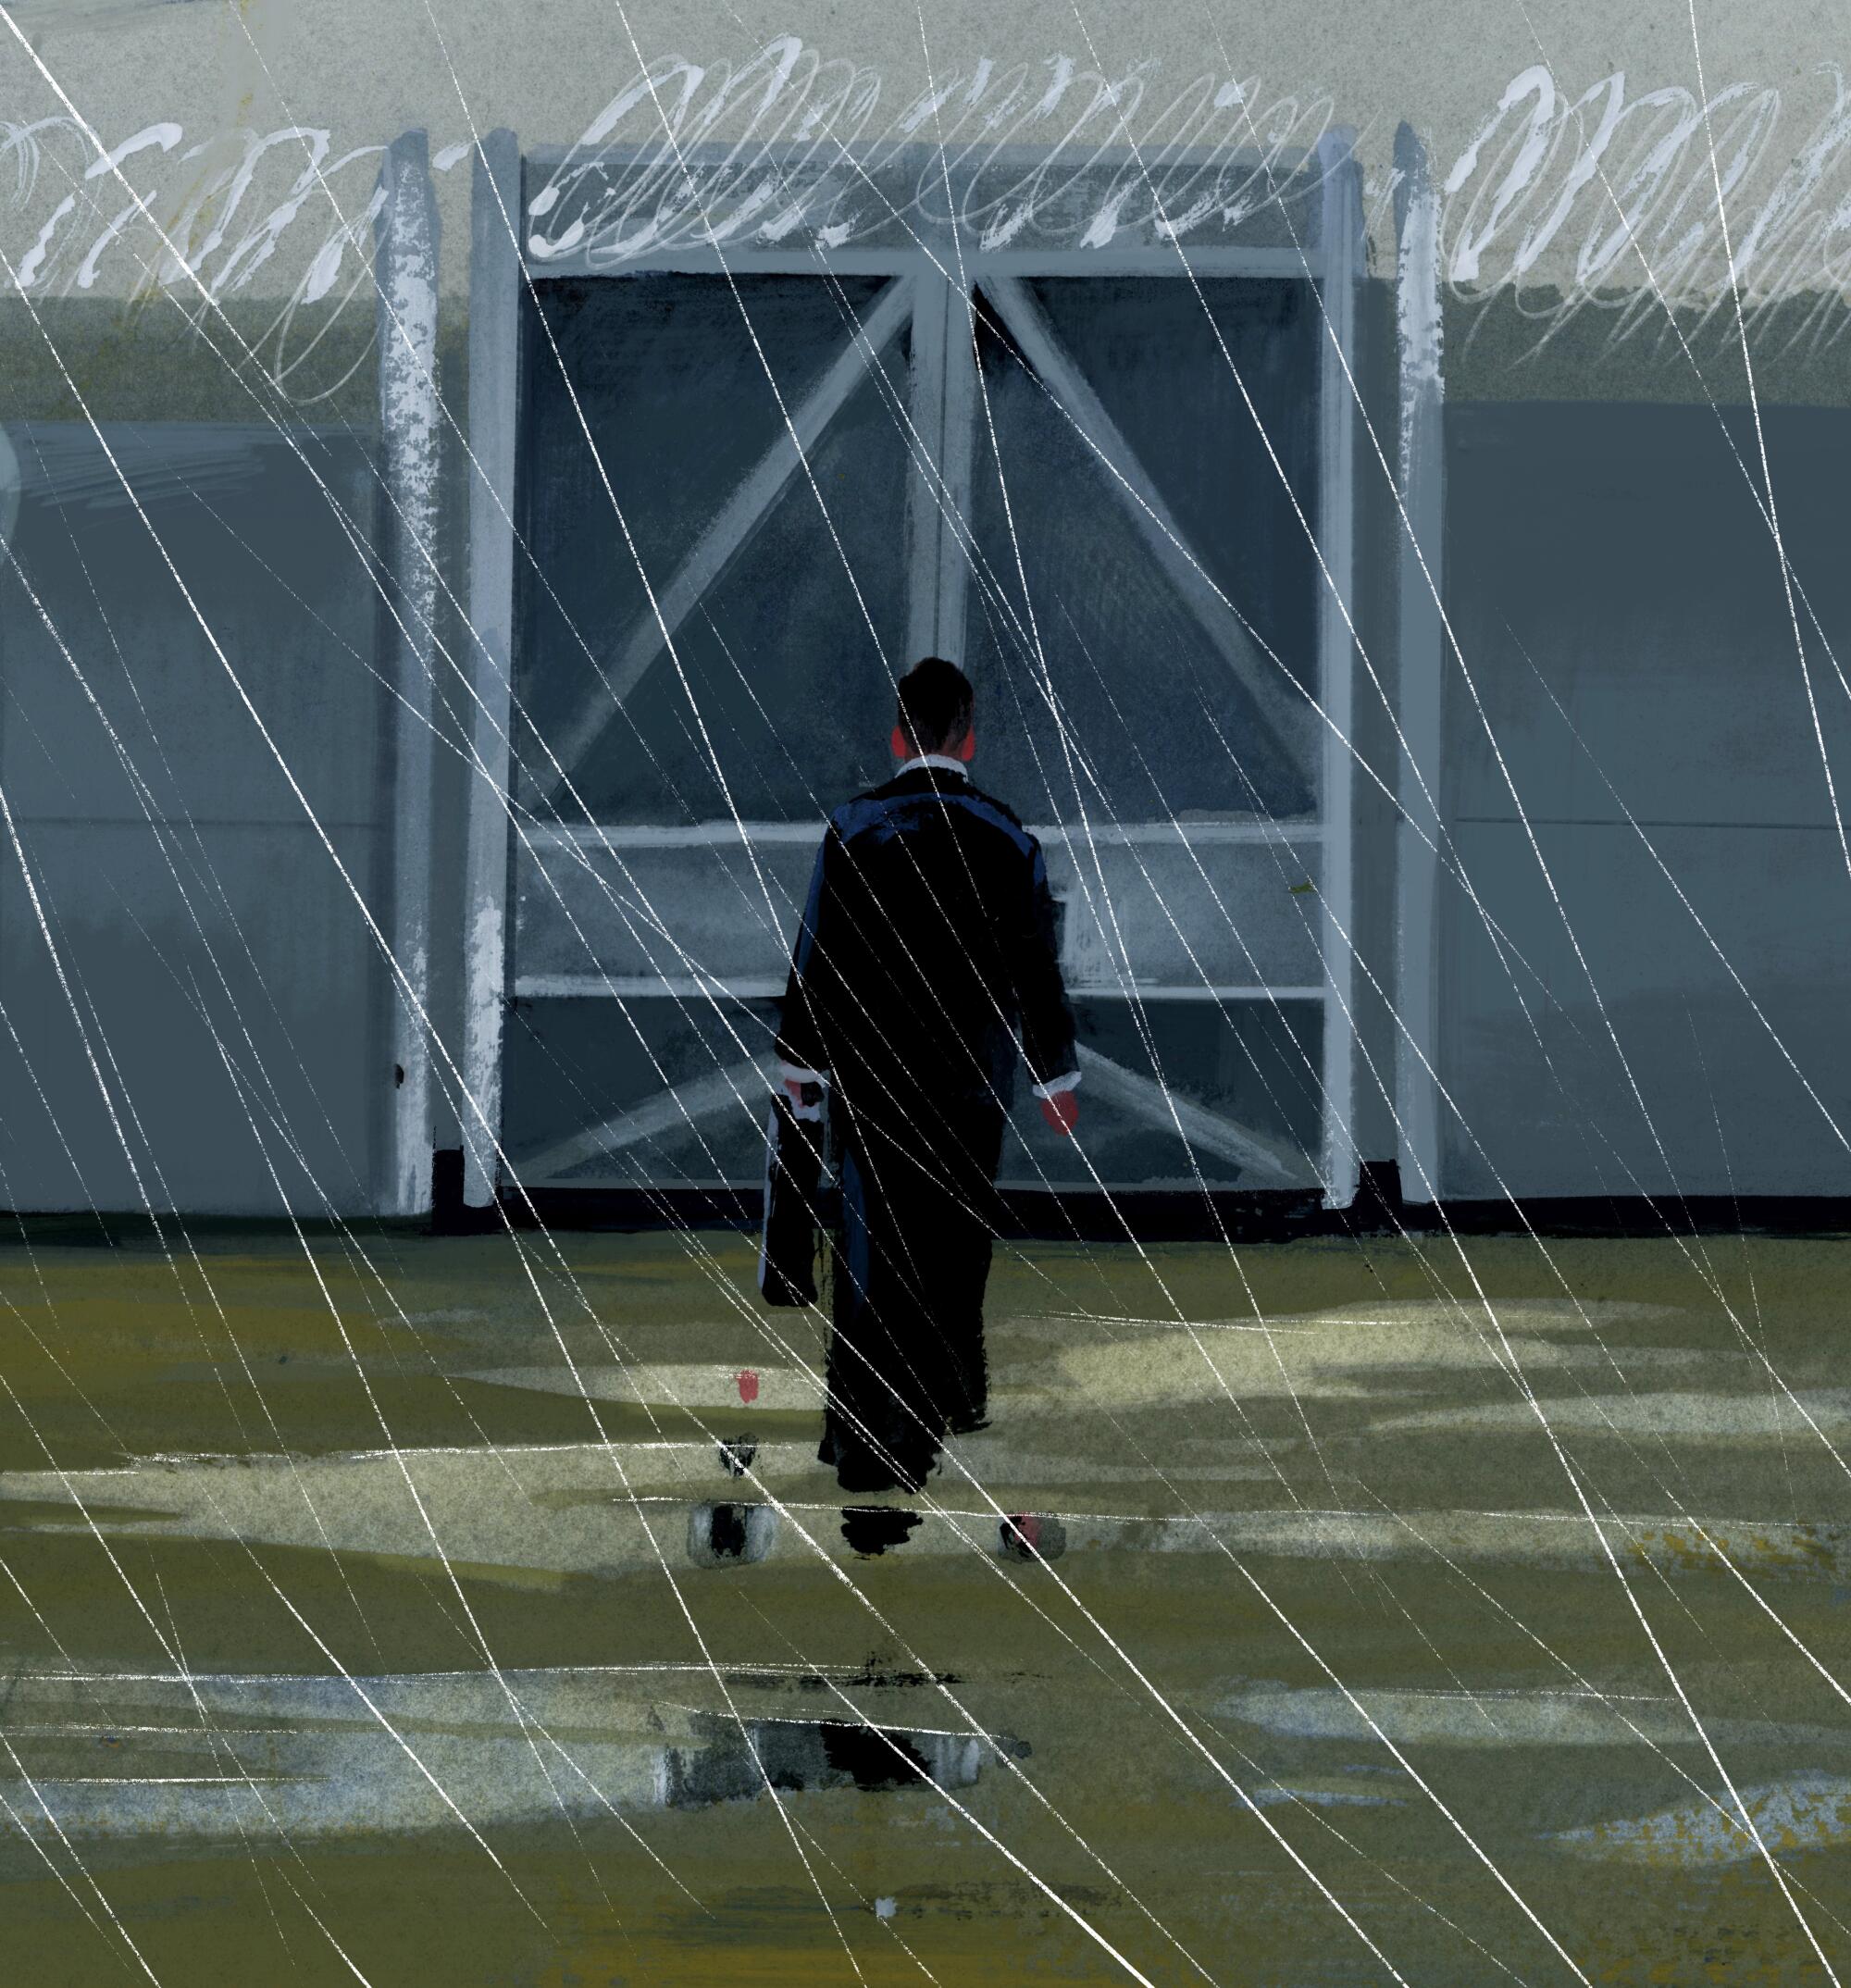 An illustration of a lawyer with a briefcase walking into prison to visit a client.